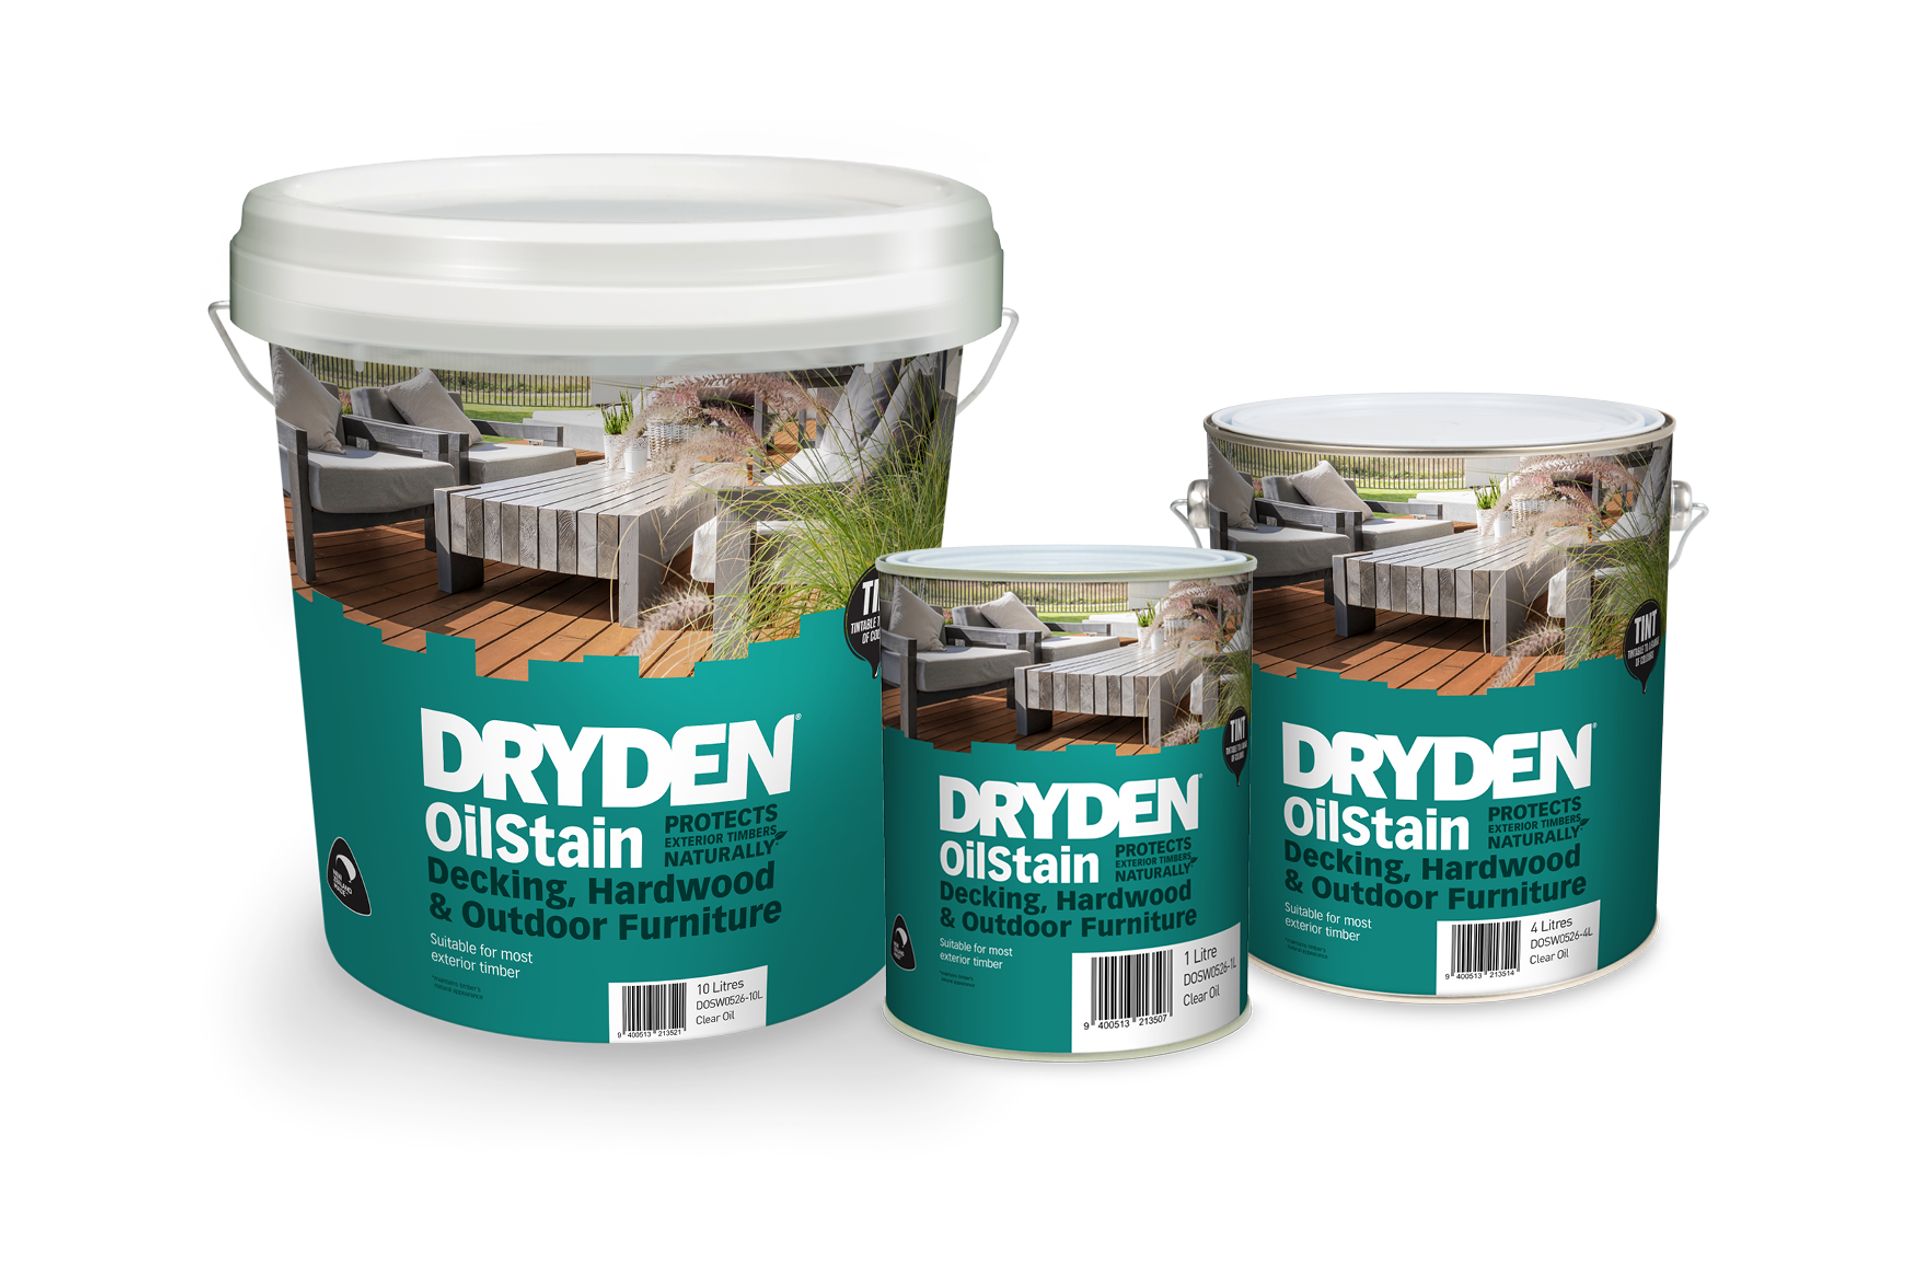 Dryden OilStain nourishes wood from within.